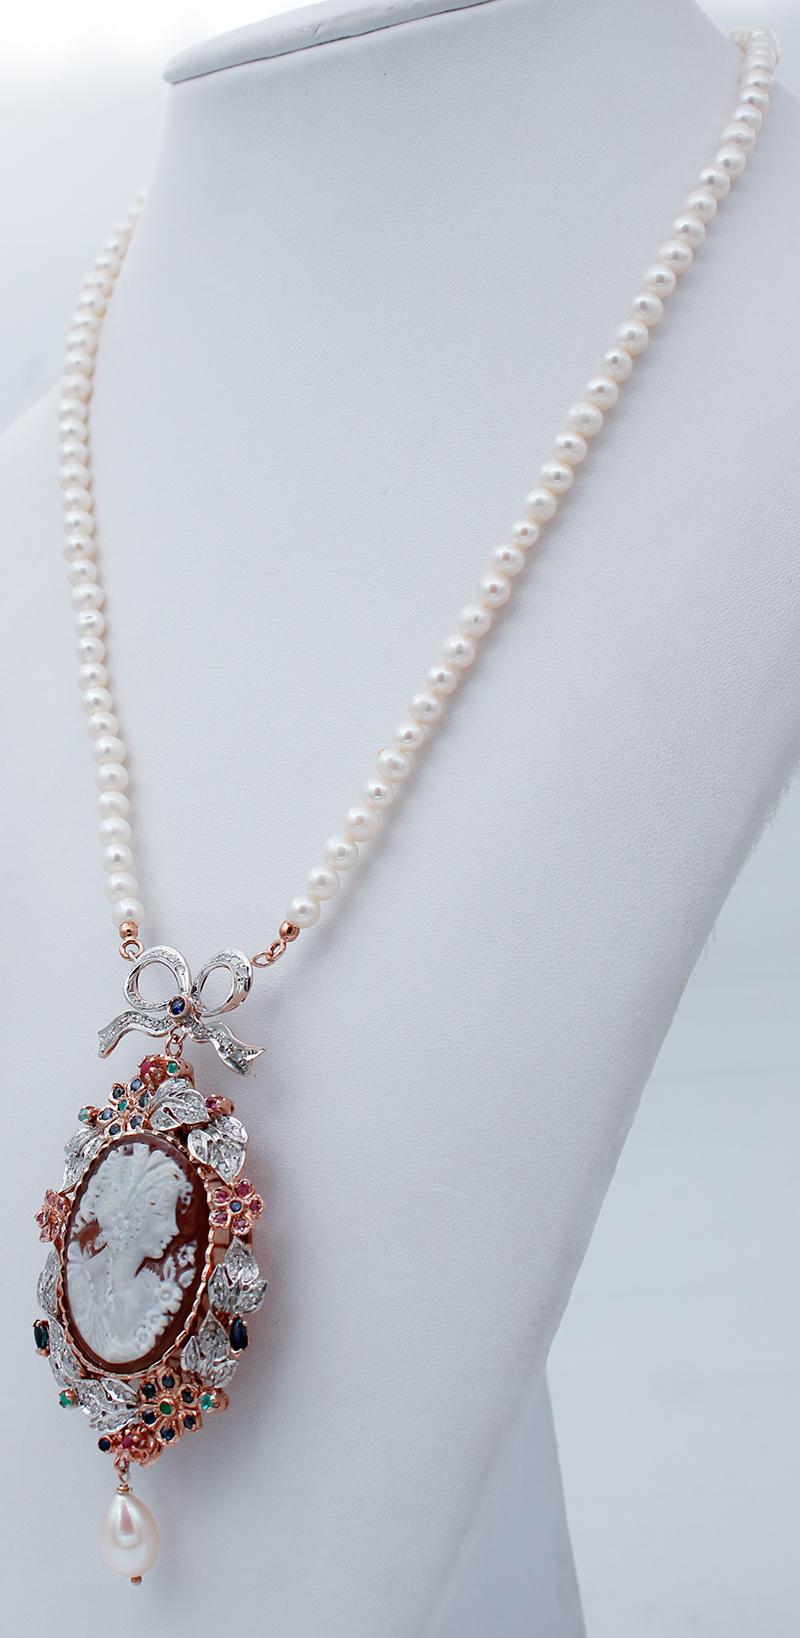 Retro Diamonds Emeralds Sapphires Rubies, Pearls, Cameo, 14kt Gold and Silver Necklace